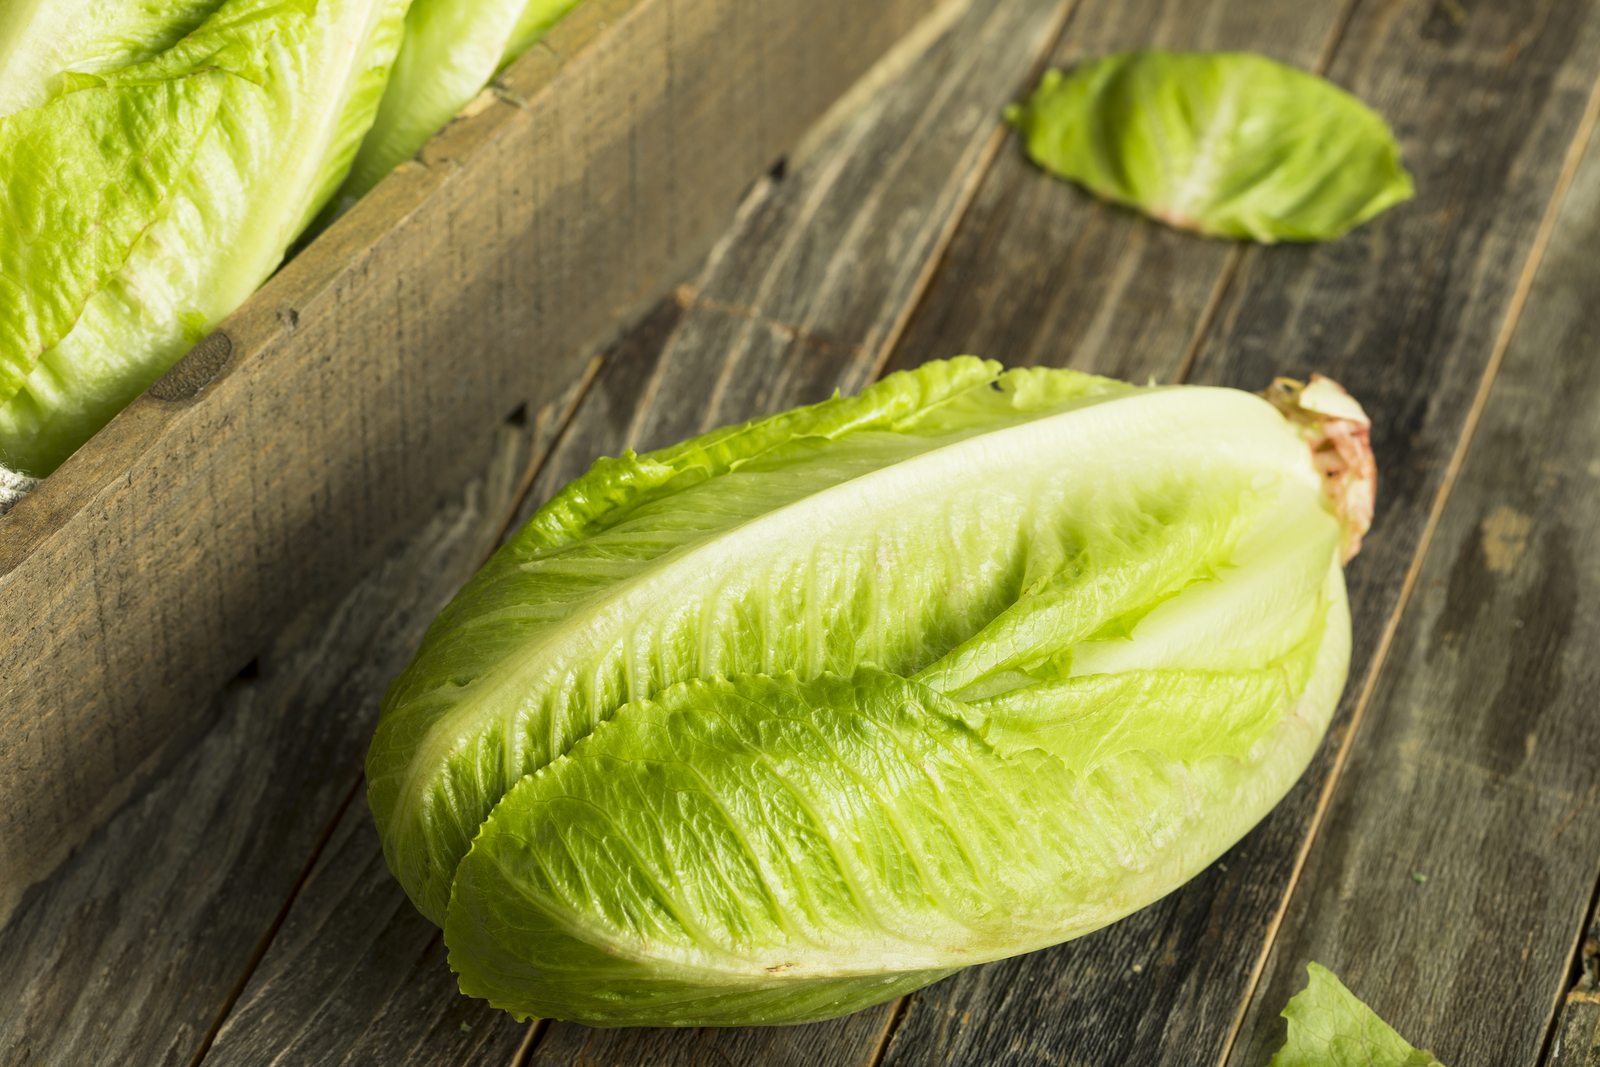 Does Romaine Have Any Health Benefits? [BIO Podcast: Ep. 178]